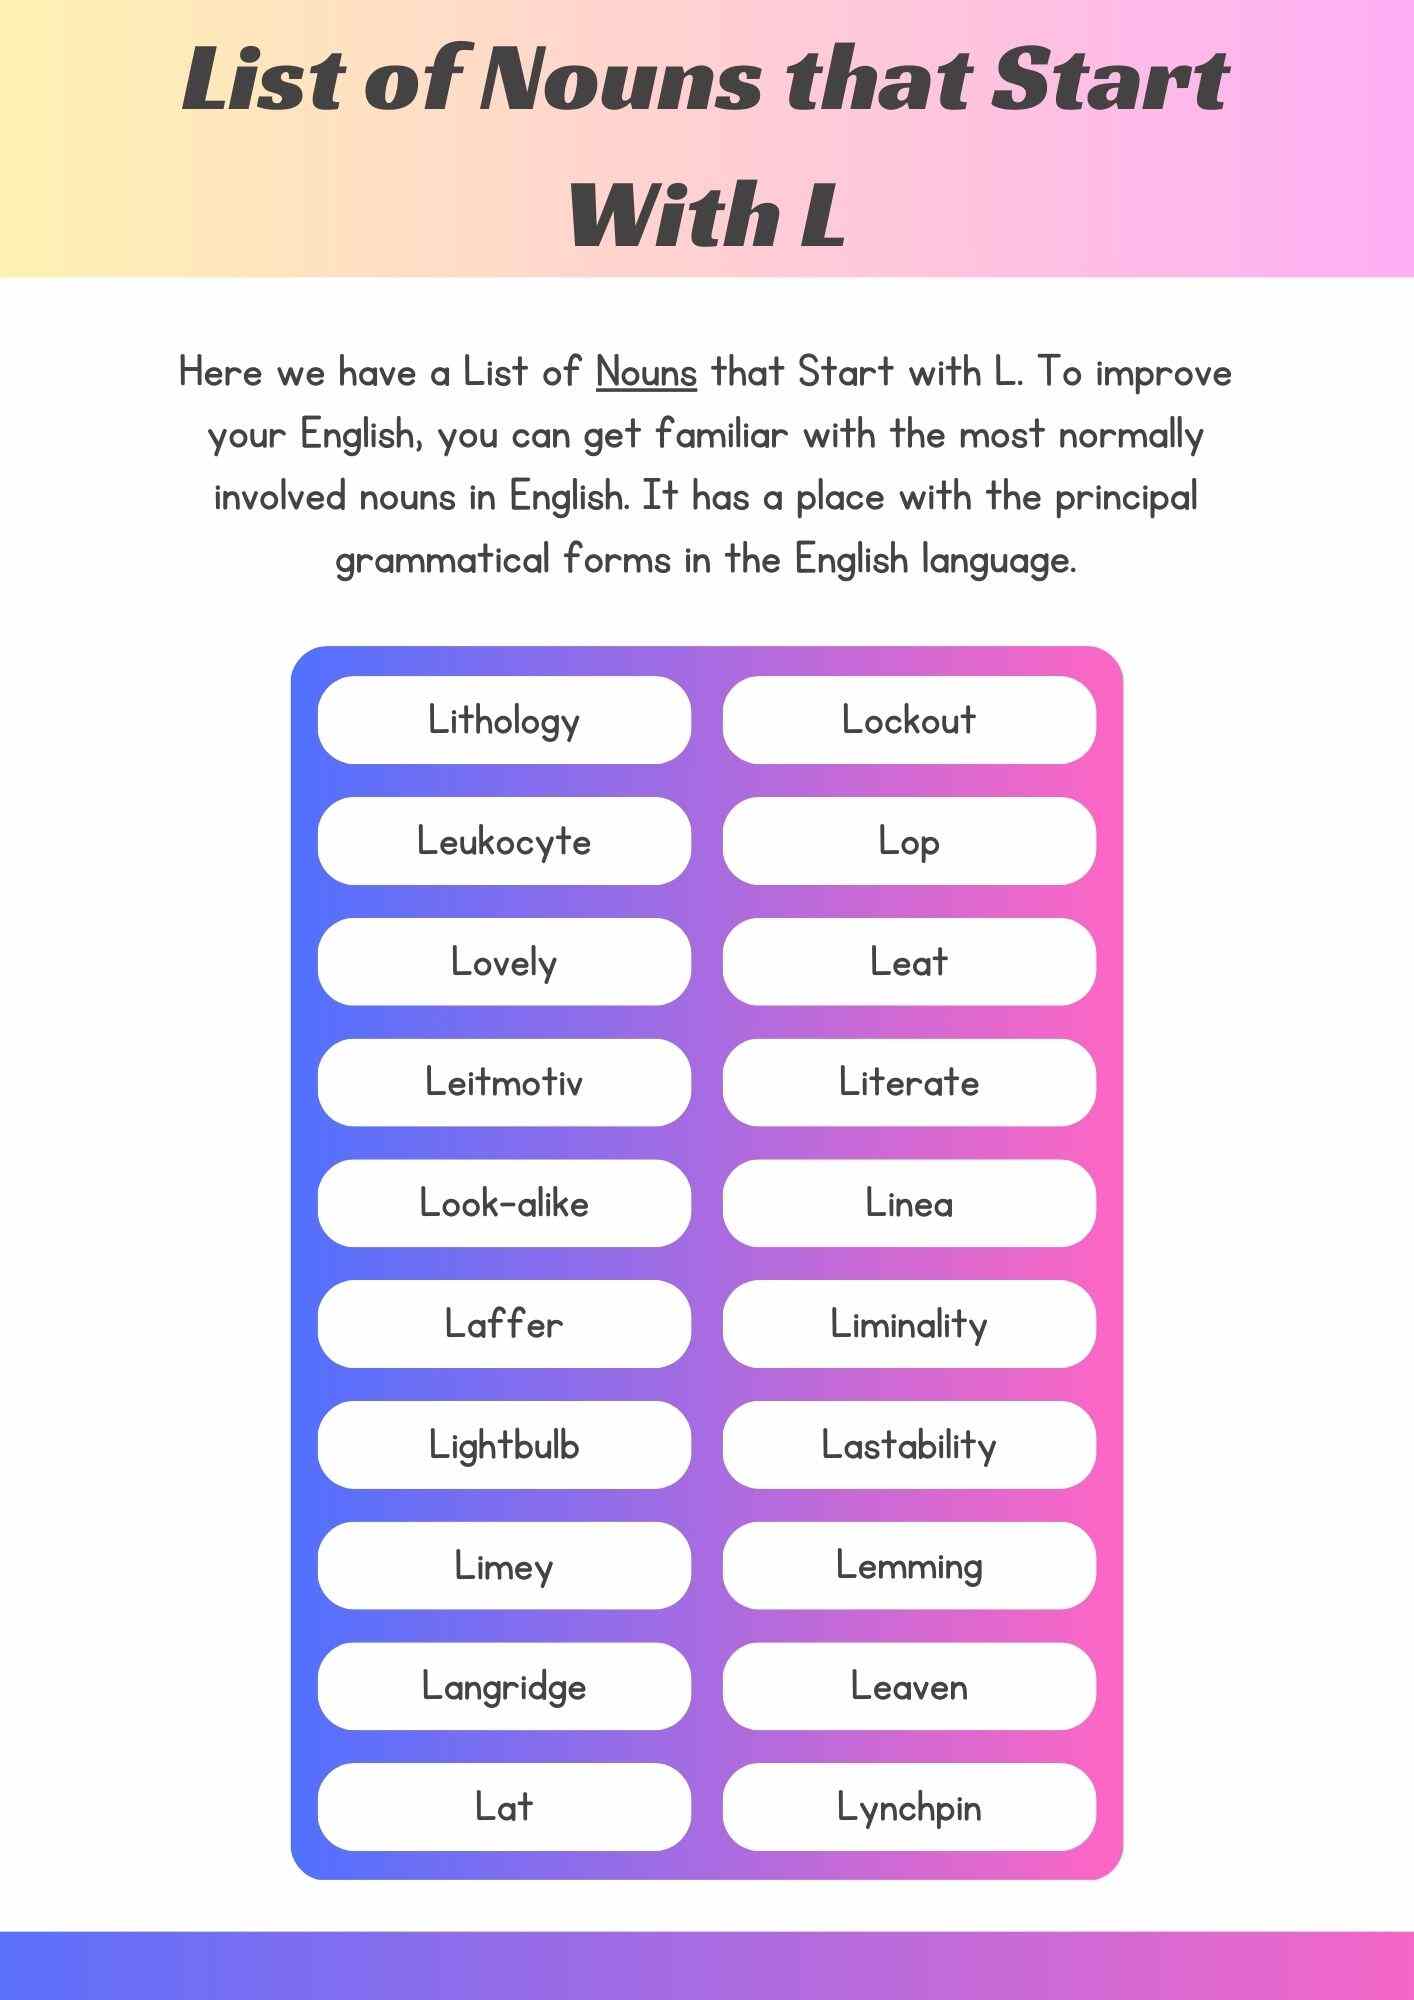 List of Nouns that Start With L